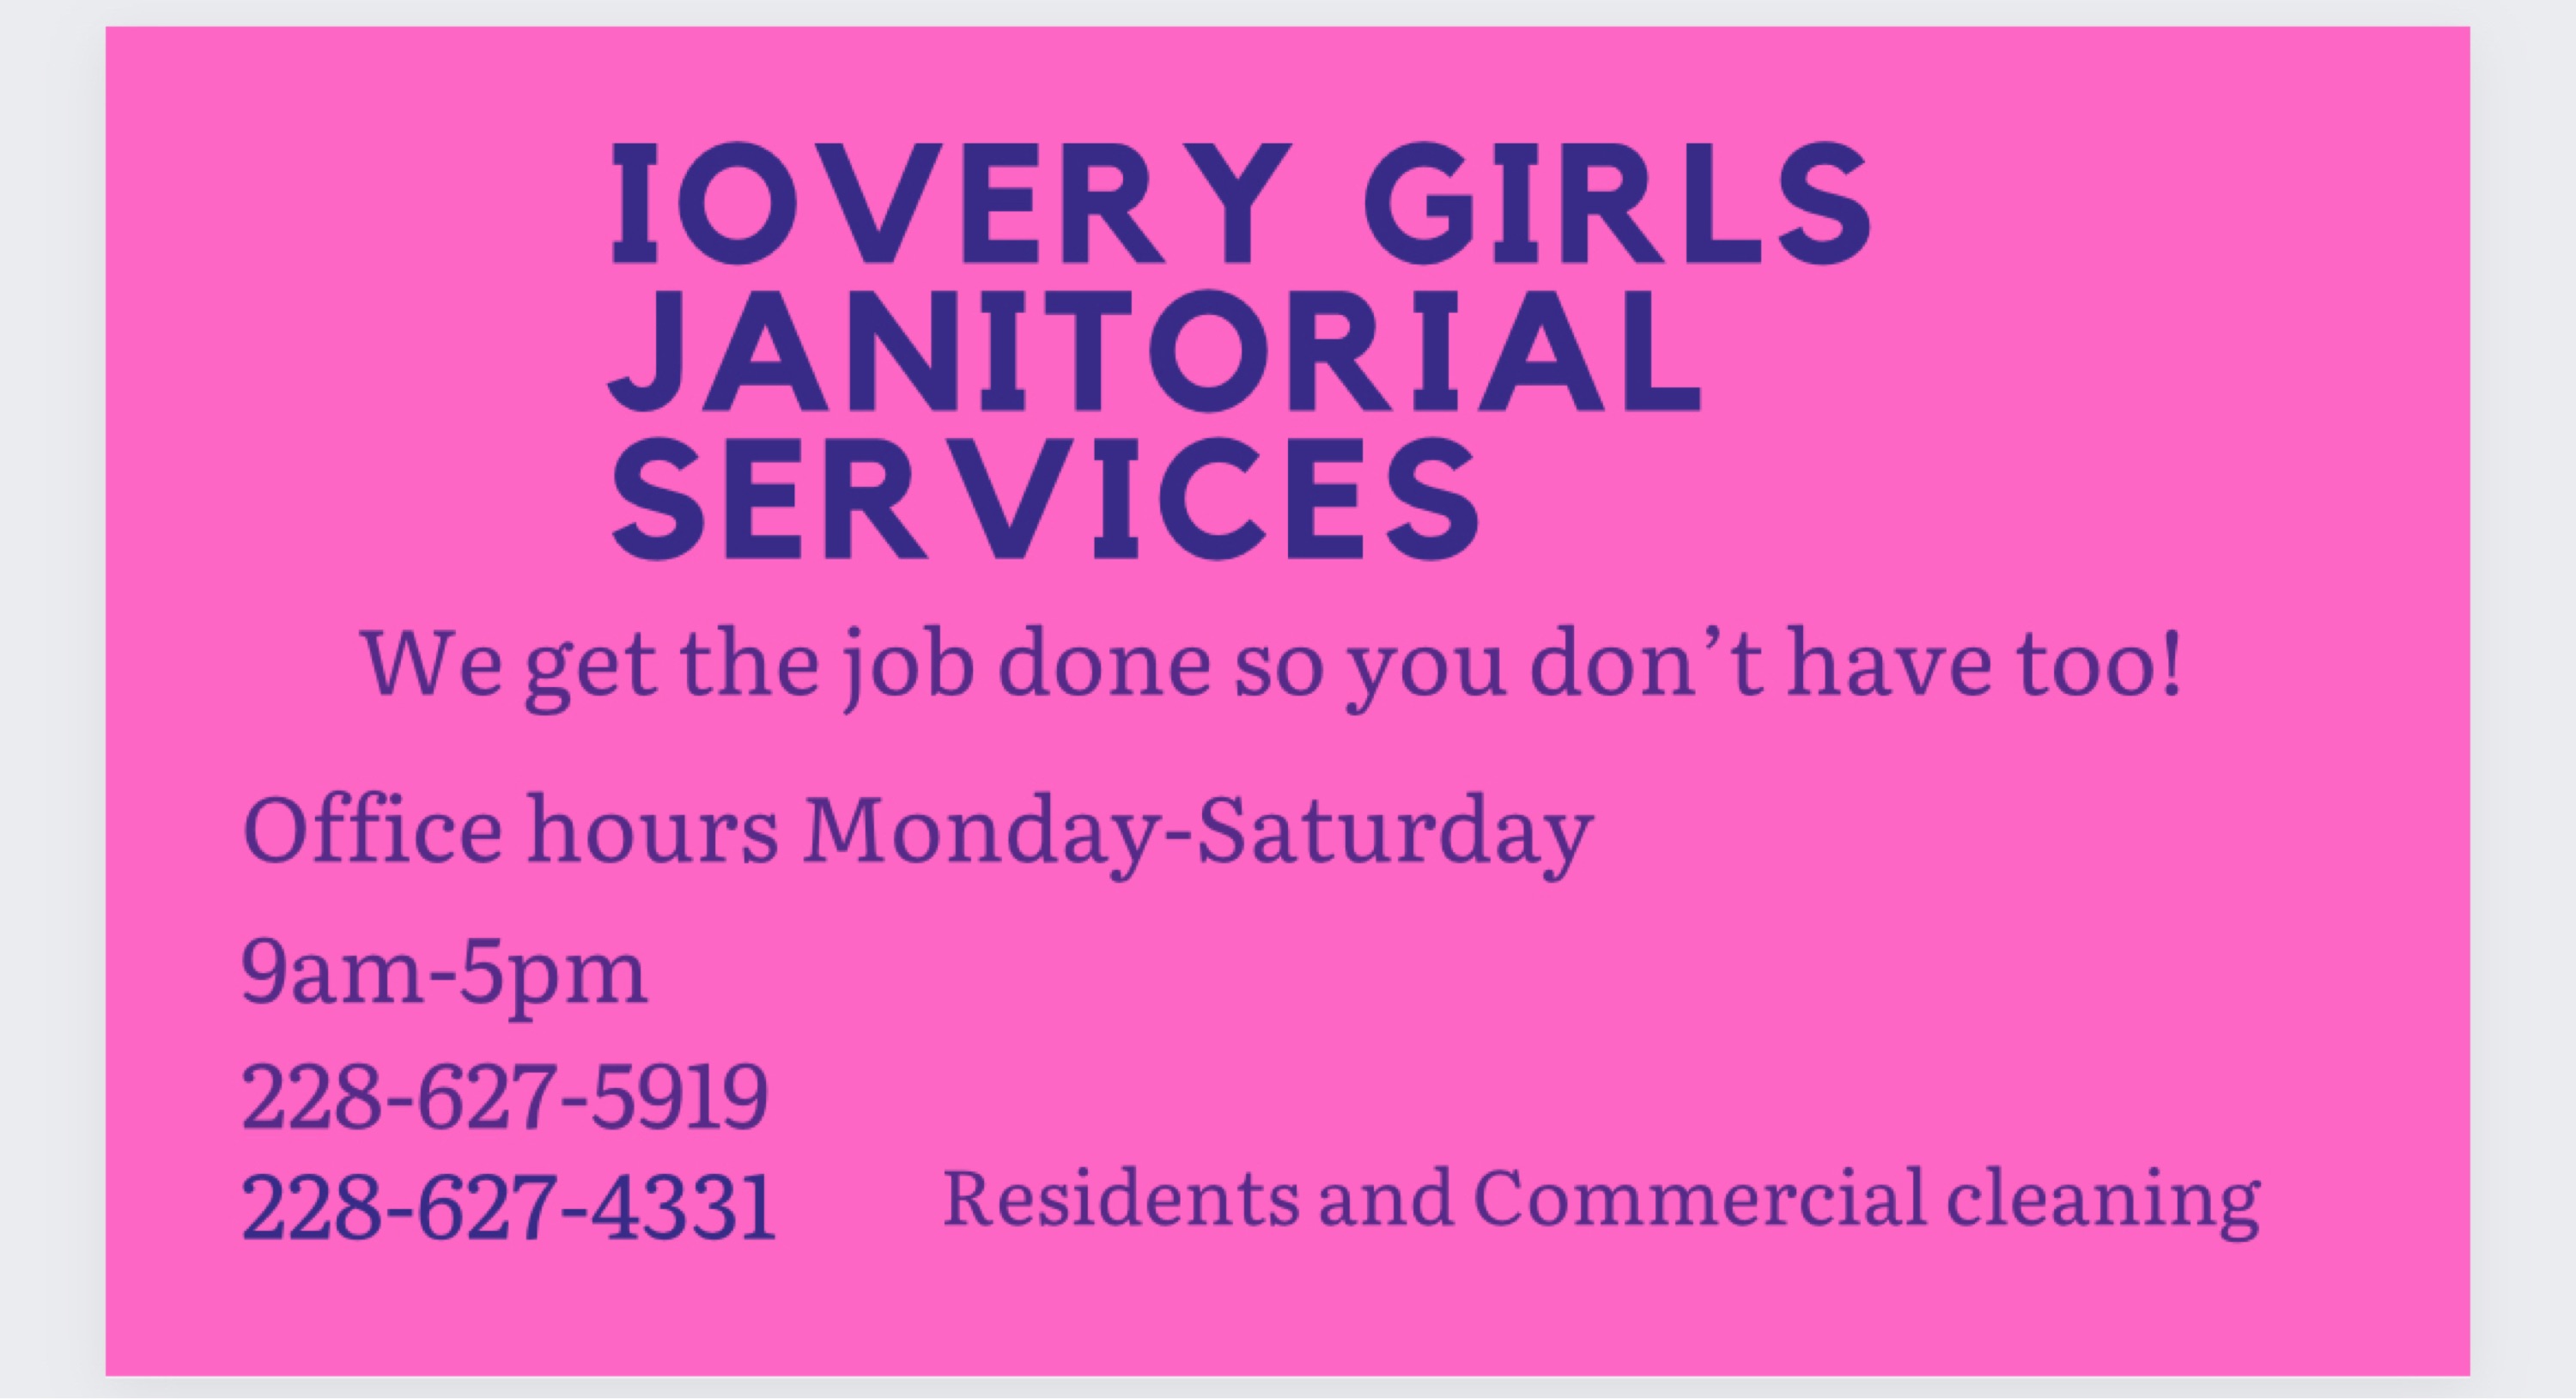 Iovery Girls Janitorial Services, LLC Logo